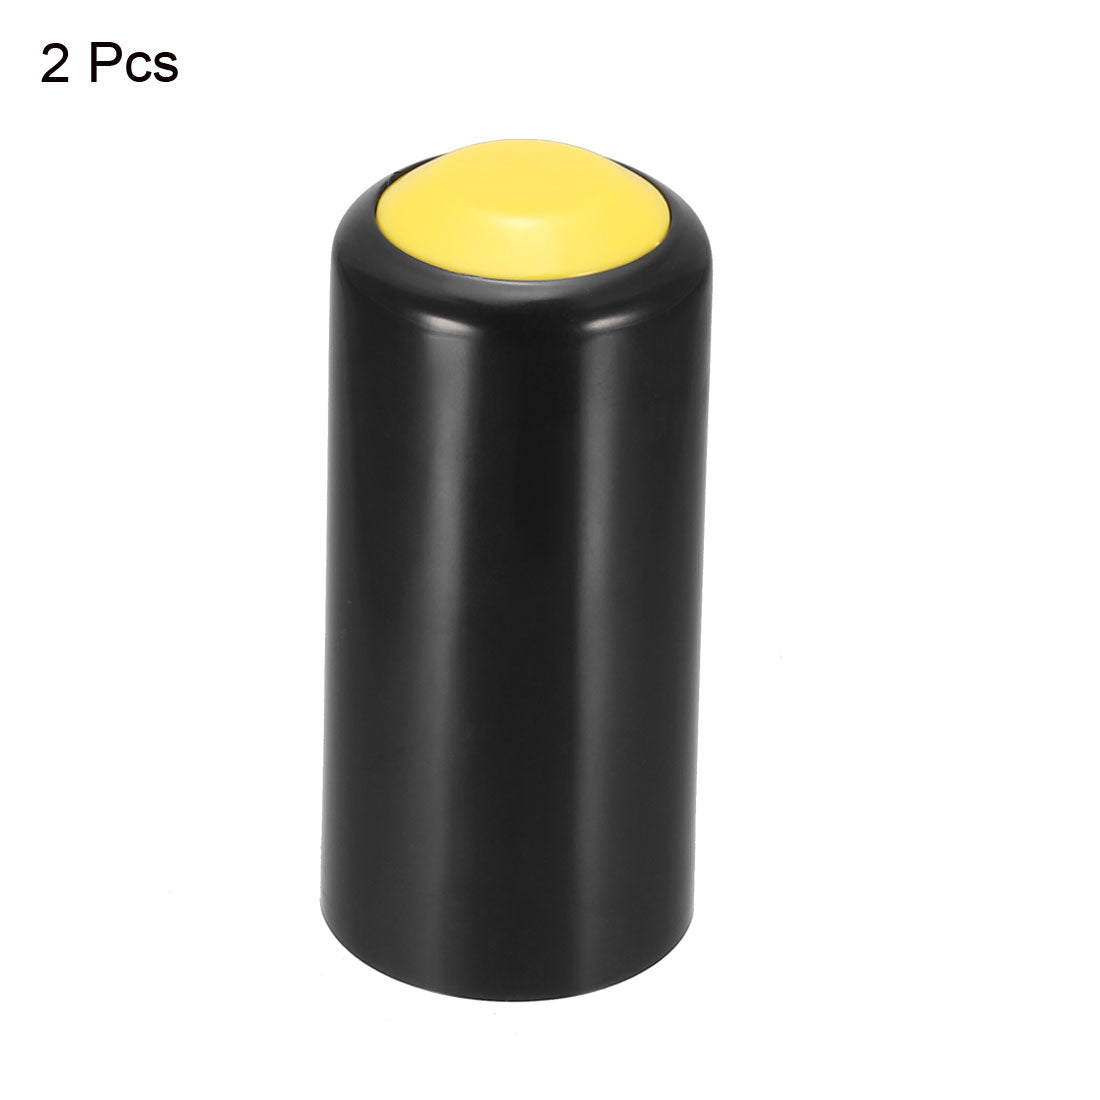 uxcell Uxcell Microphones Battery Cover Mic Battery Screw on Cap Cup Cover for PGX24 SLX24 PG58 SM58 BETA58 Wireless Yellow 2Pcs